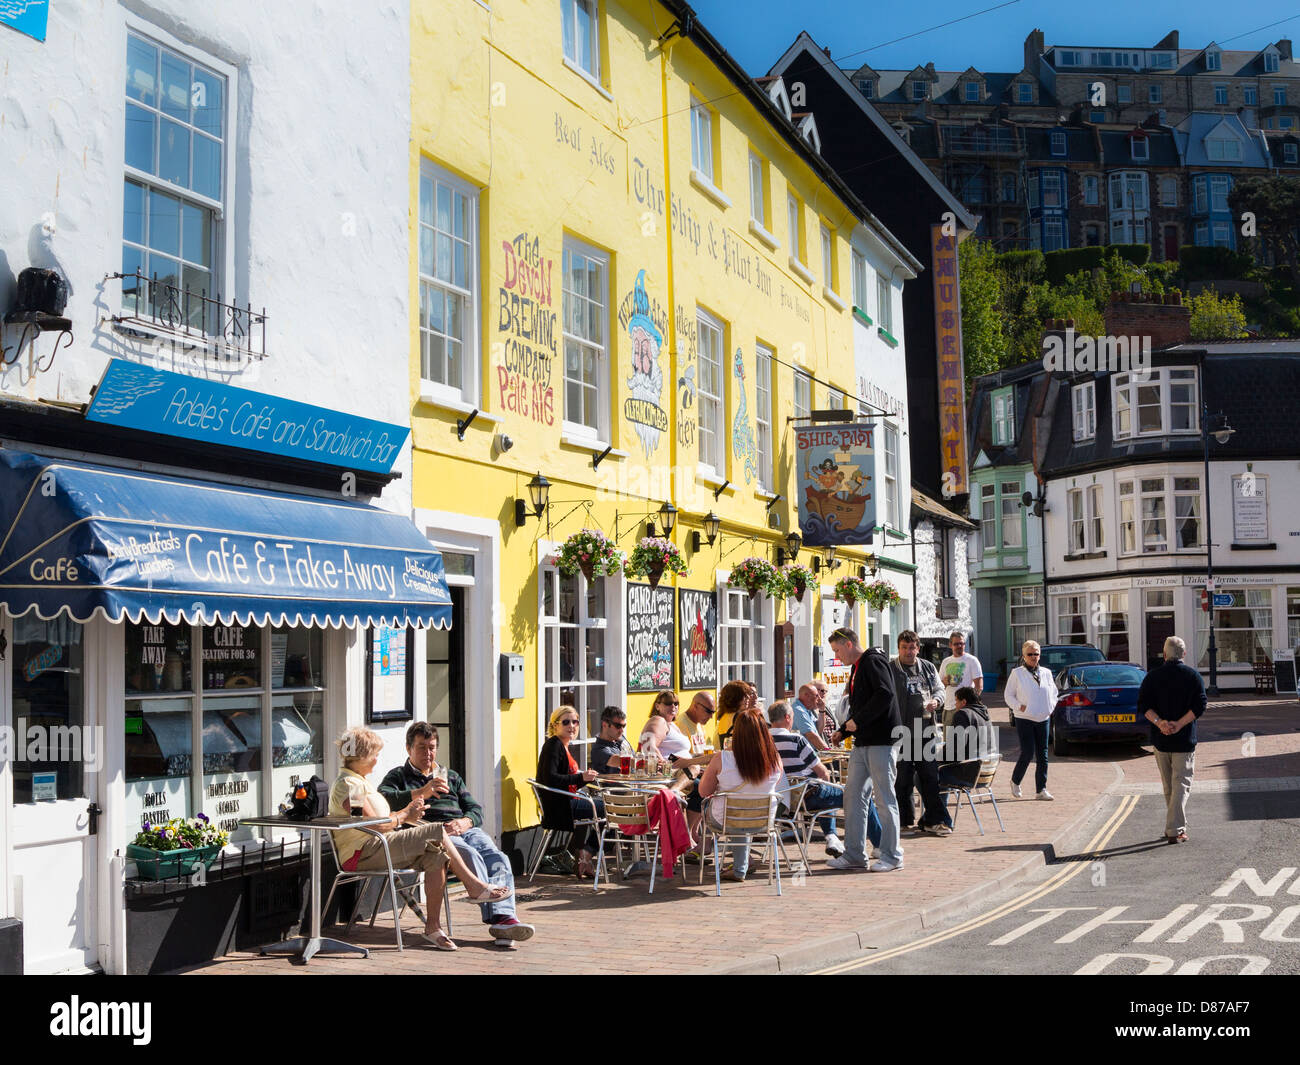 Ship and Pilot Inn with outdoor seating area, Ilfracombe, Devon, England Stock Photo